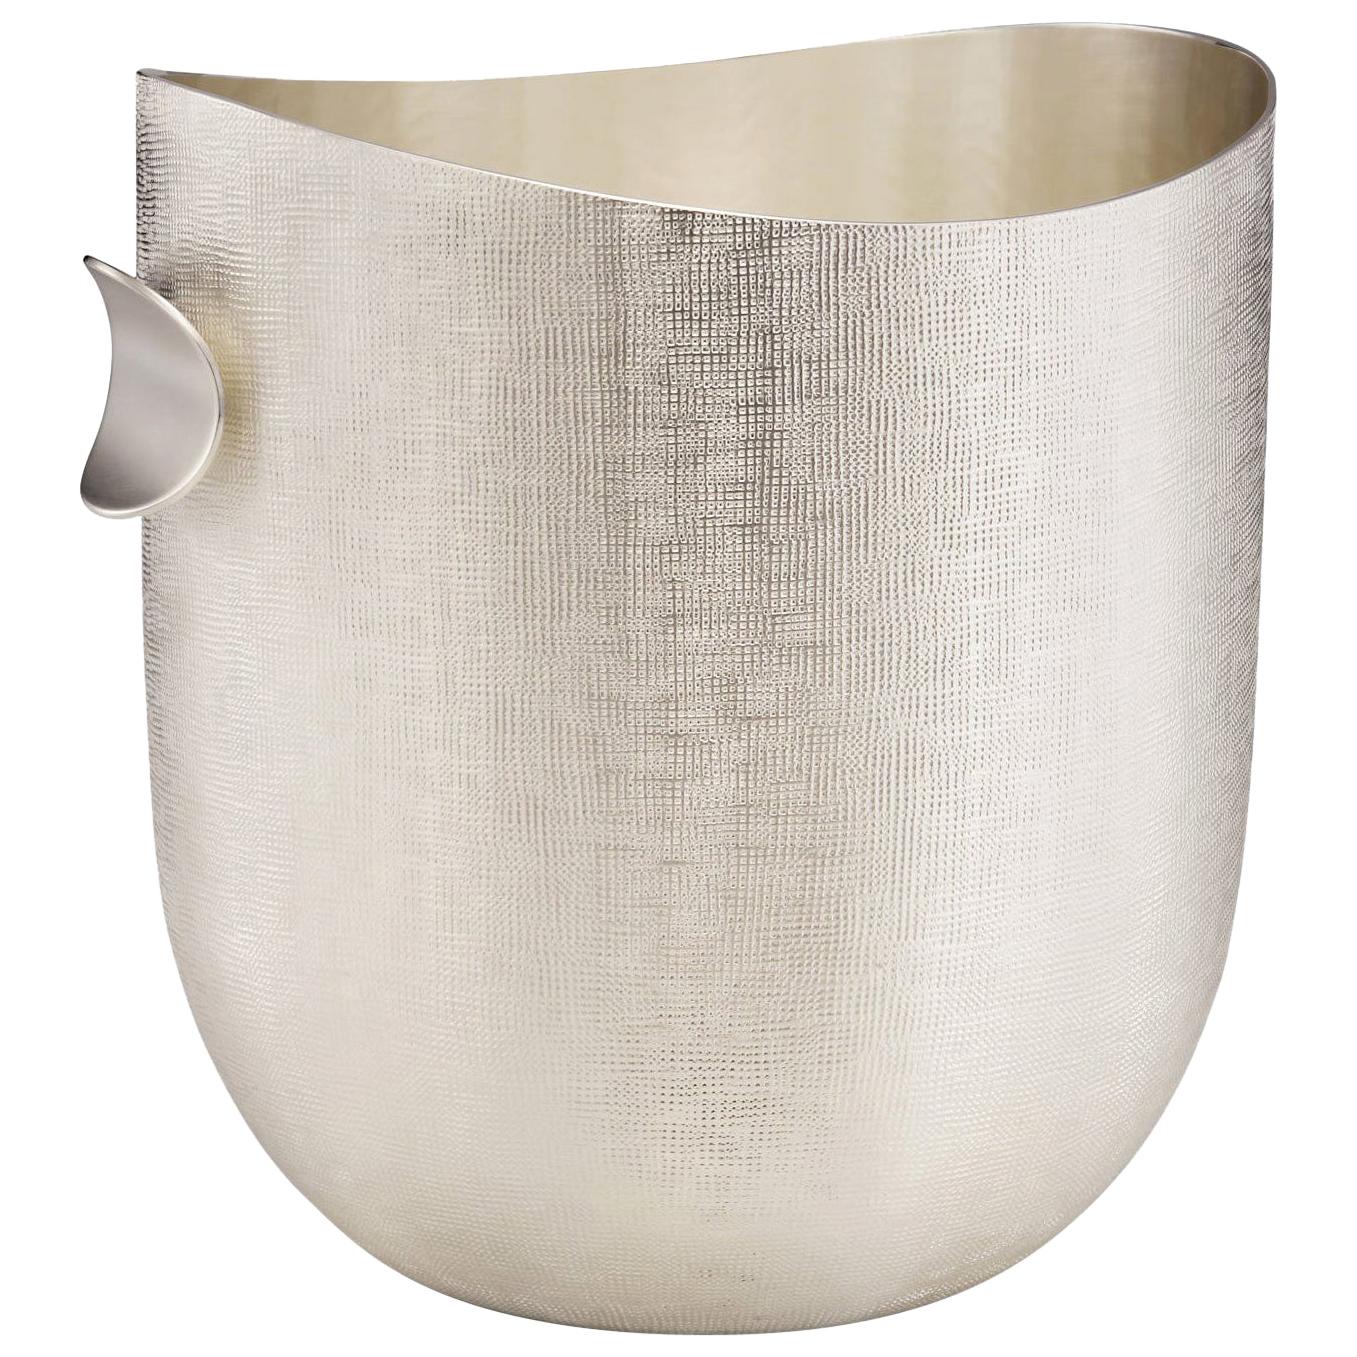 Modern Champagne Bucket, Silver Plated